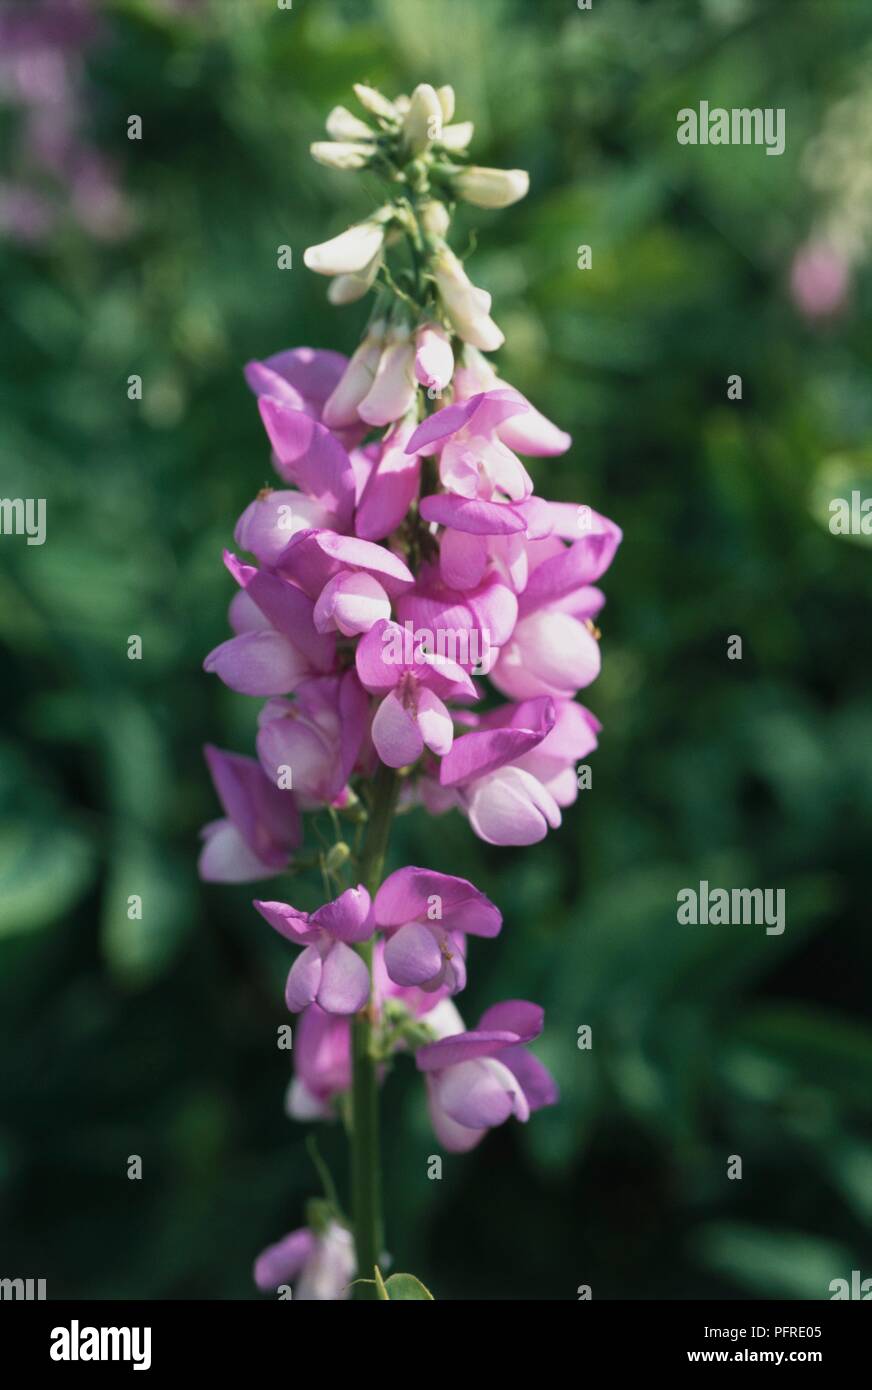 Galega 'His Majesty' with pink flowers and white buds on long stem, close-up Stock Photo